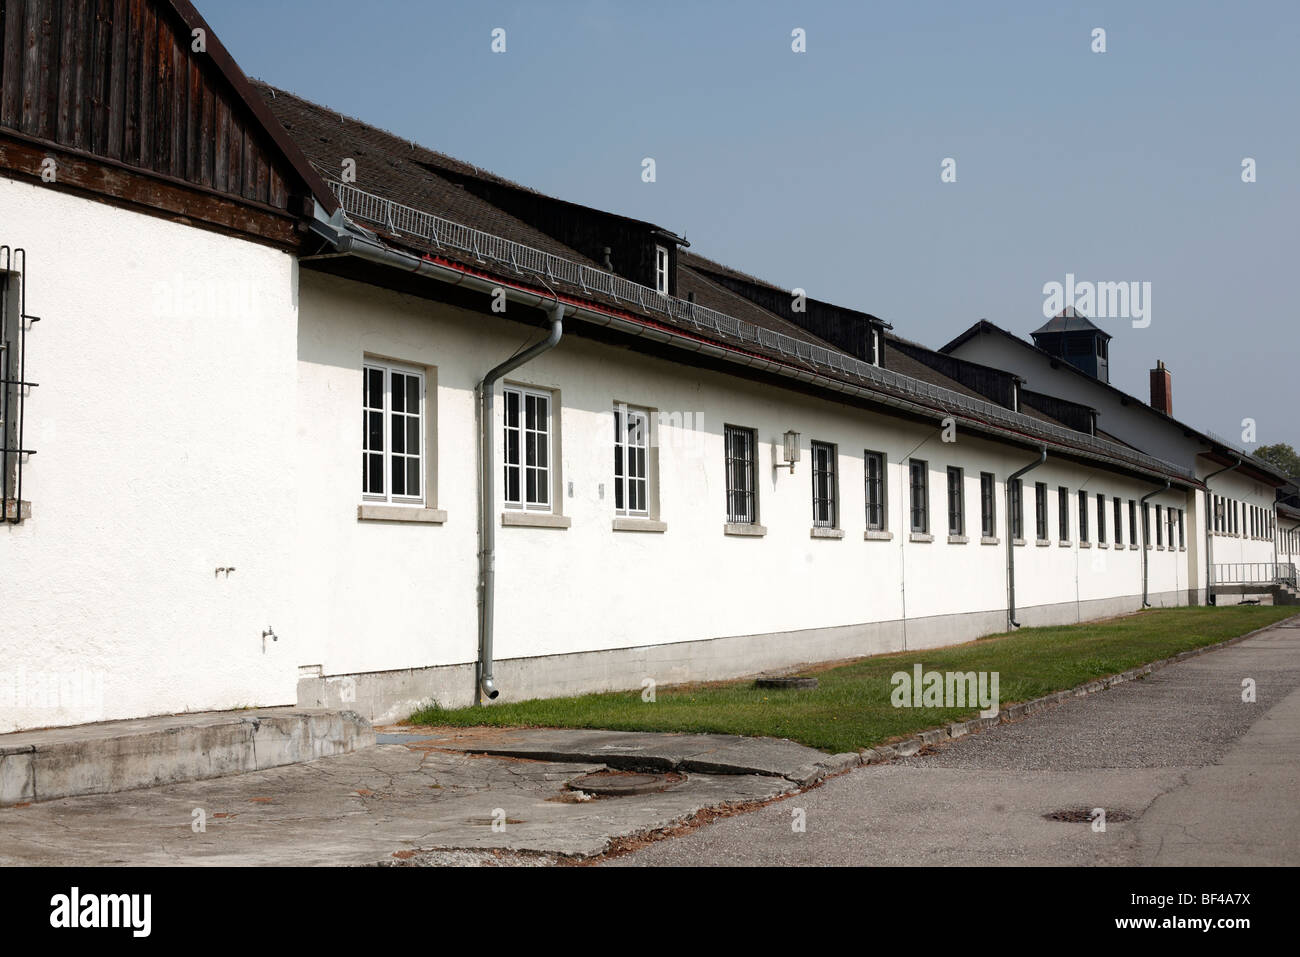 The main building and museum at the Dachau Concentration Camp Memorial site in Germany Stock Photo